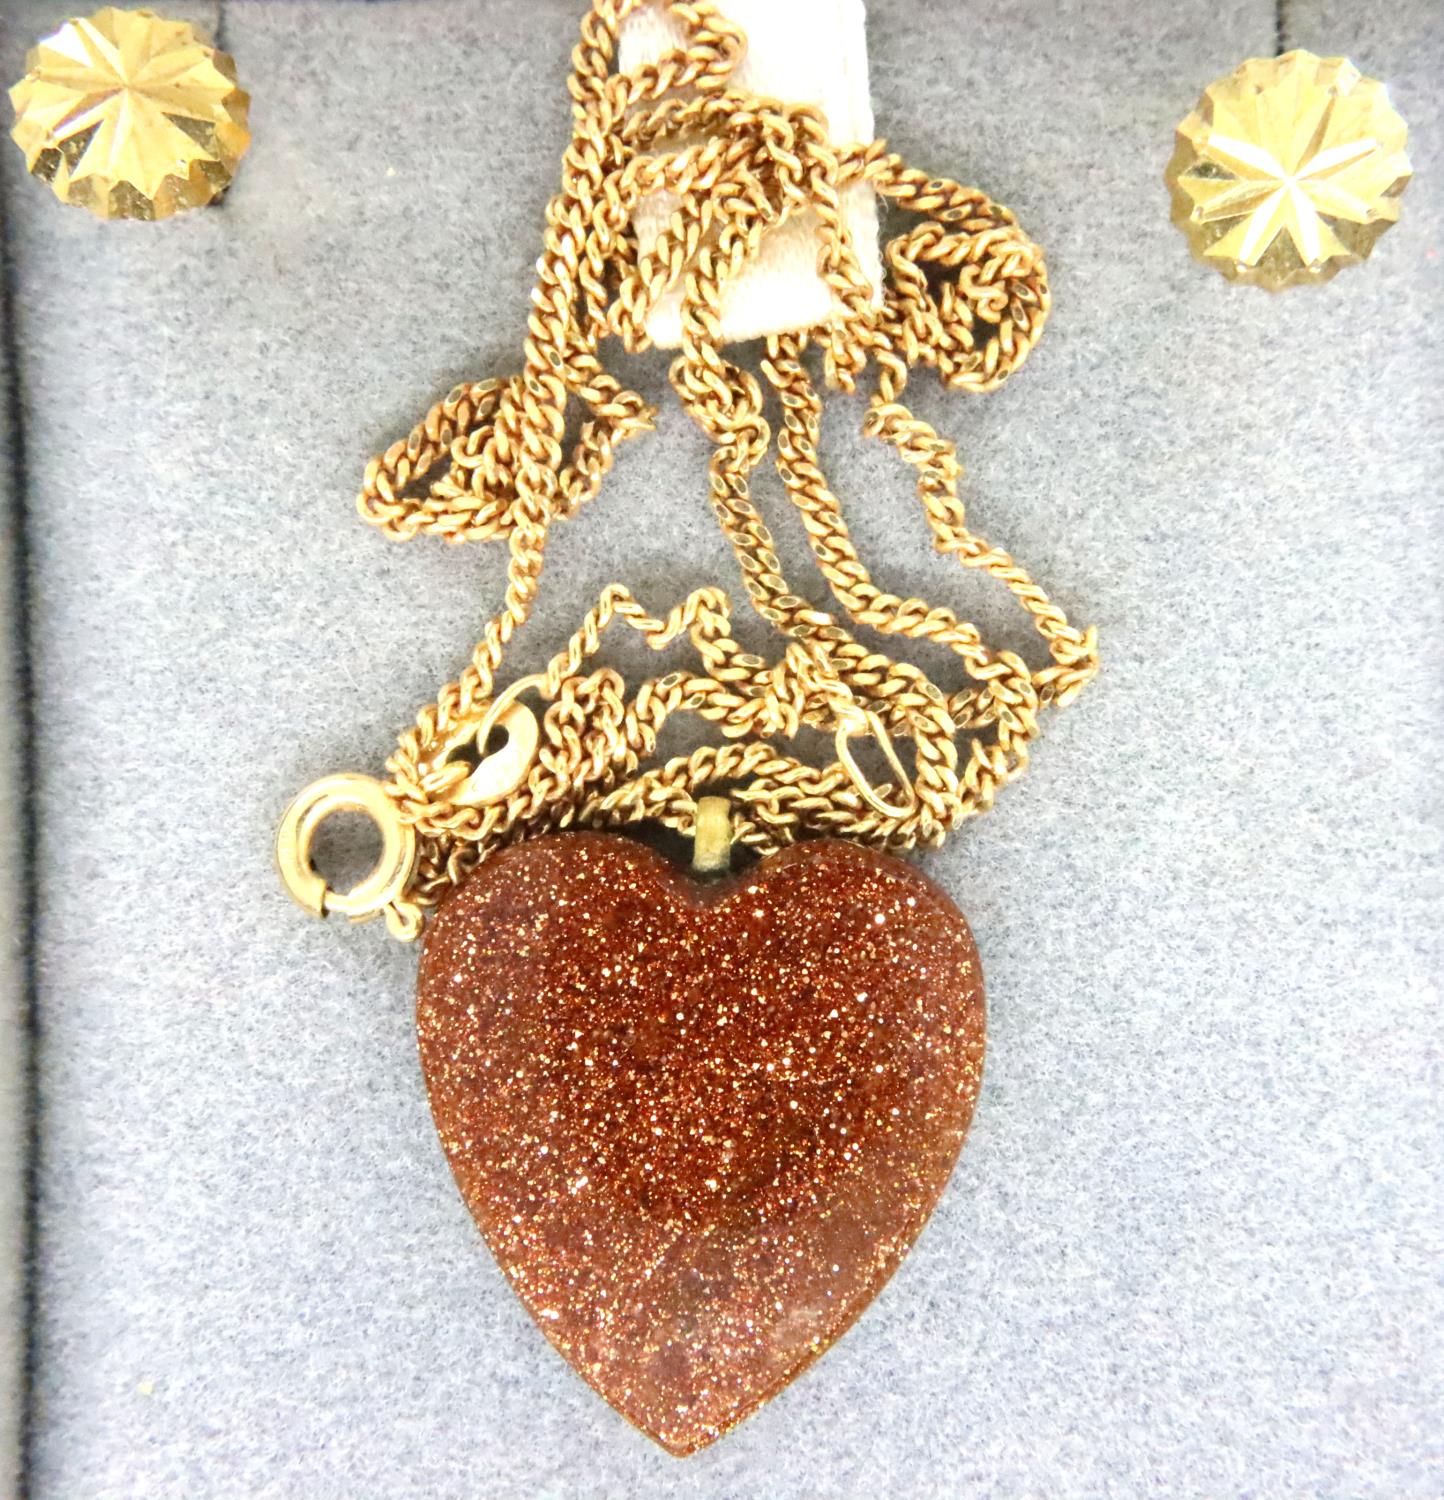 Goldstone heart pendant on 9ct gold chain and a pair of earrings, chain L: 41 cm, combined 3.3g. One